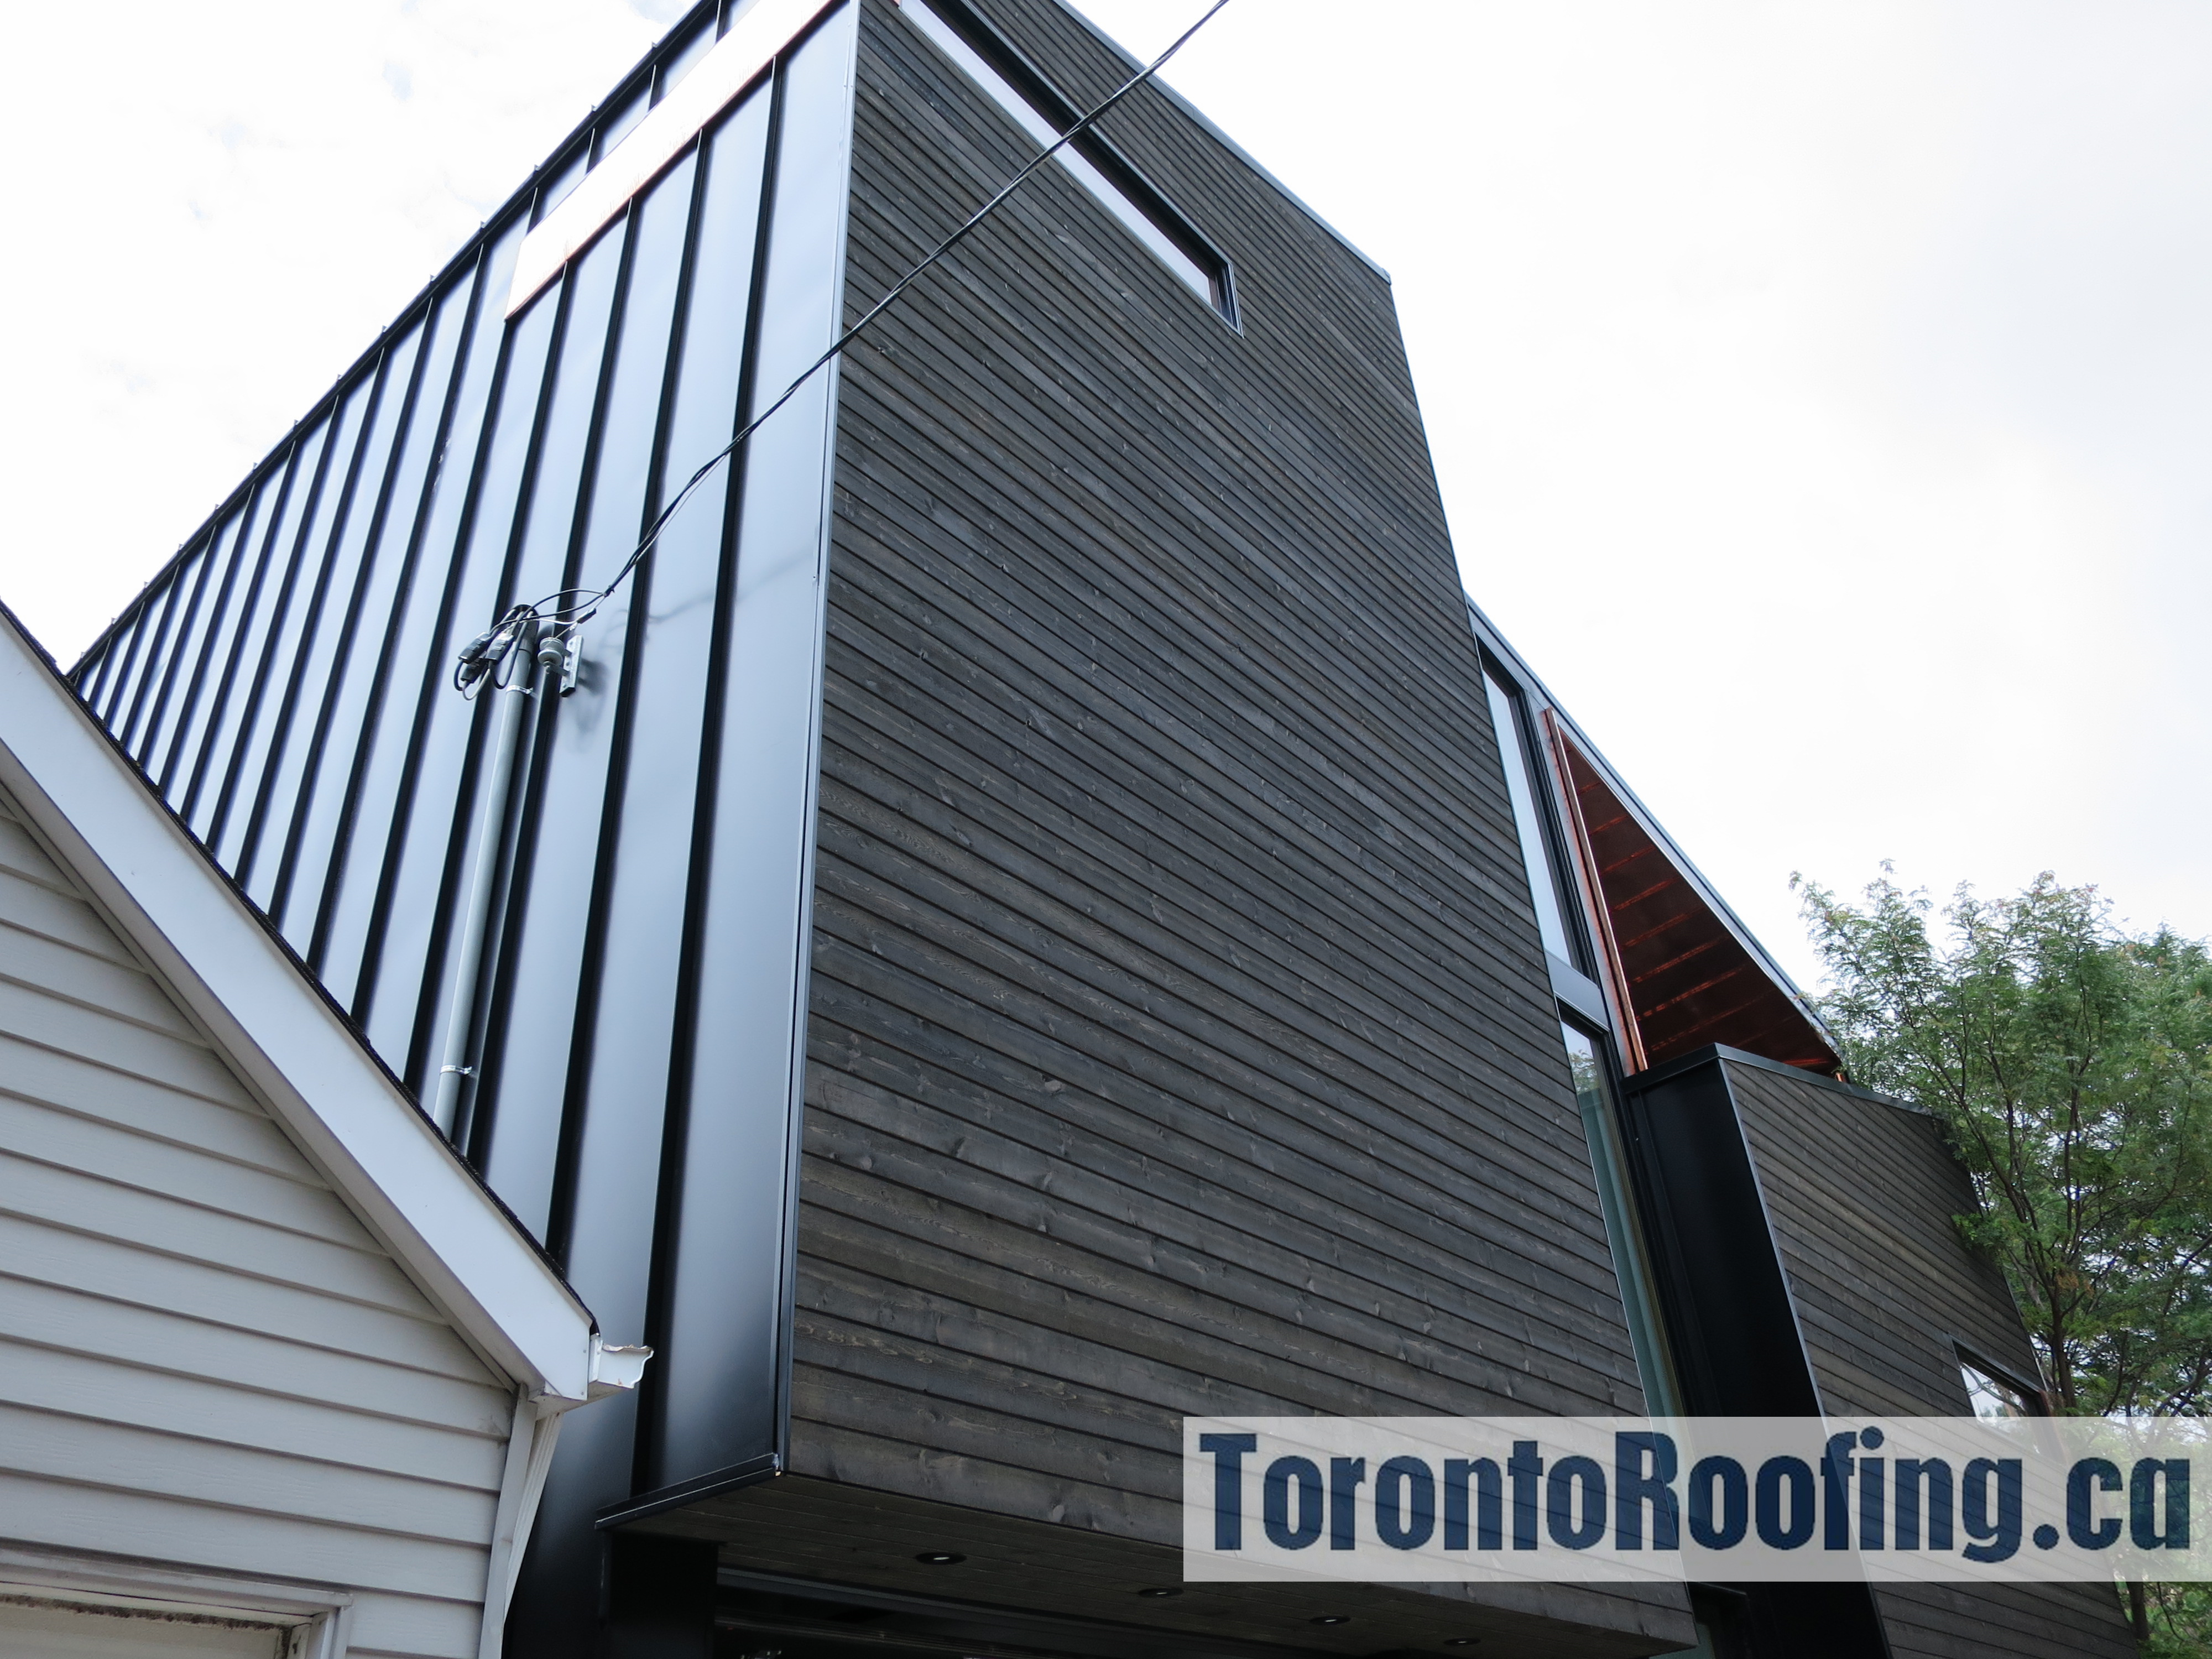 toronto-roofing-roof-siding-metal-copper-wood-modern-homes-aluminum-cladding-architeture-building-contractor-exterior-10